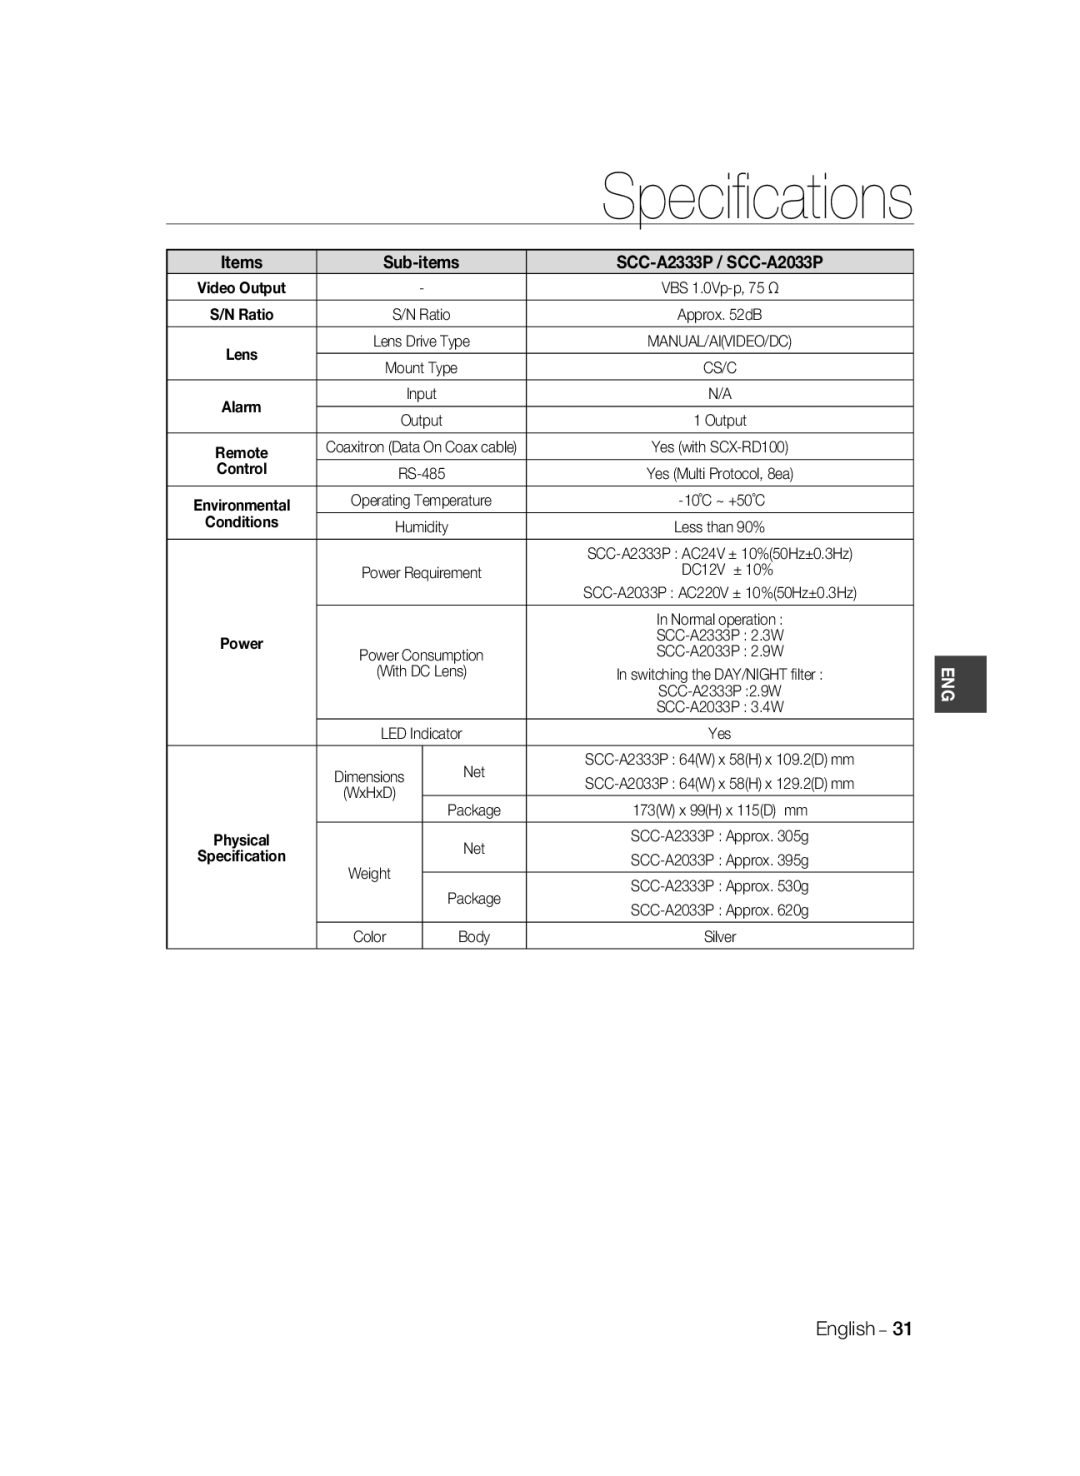 Samsung manual Speciﬁcations, Items, Sub-items, SCC-A2333P / SCC-A2033P, Control, Conditions 